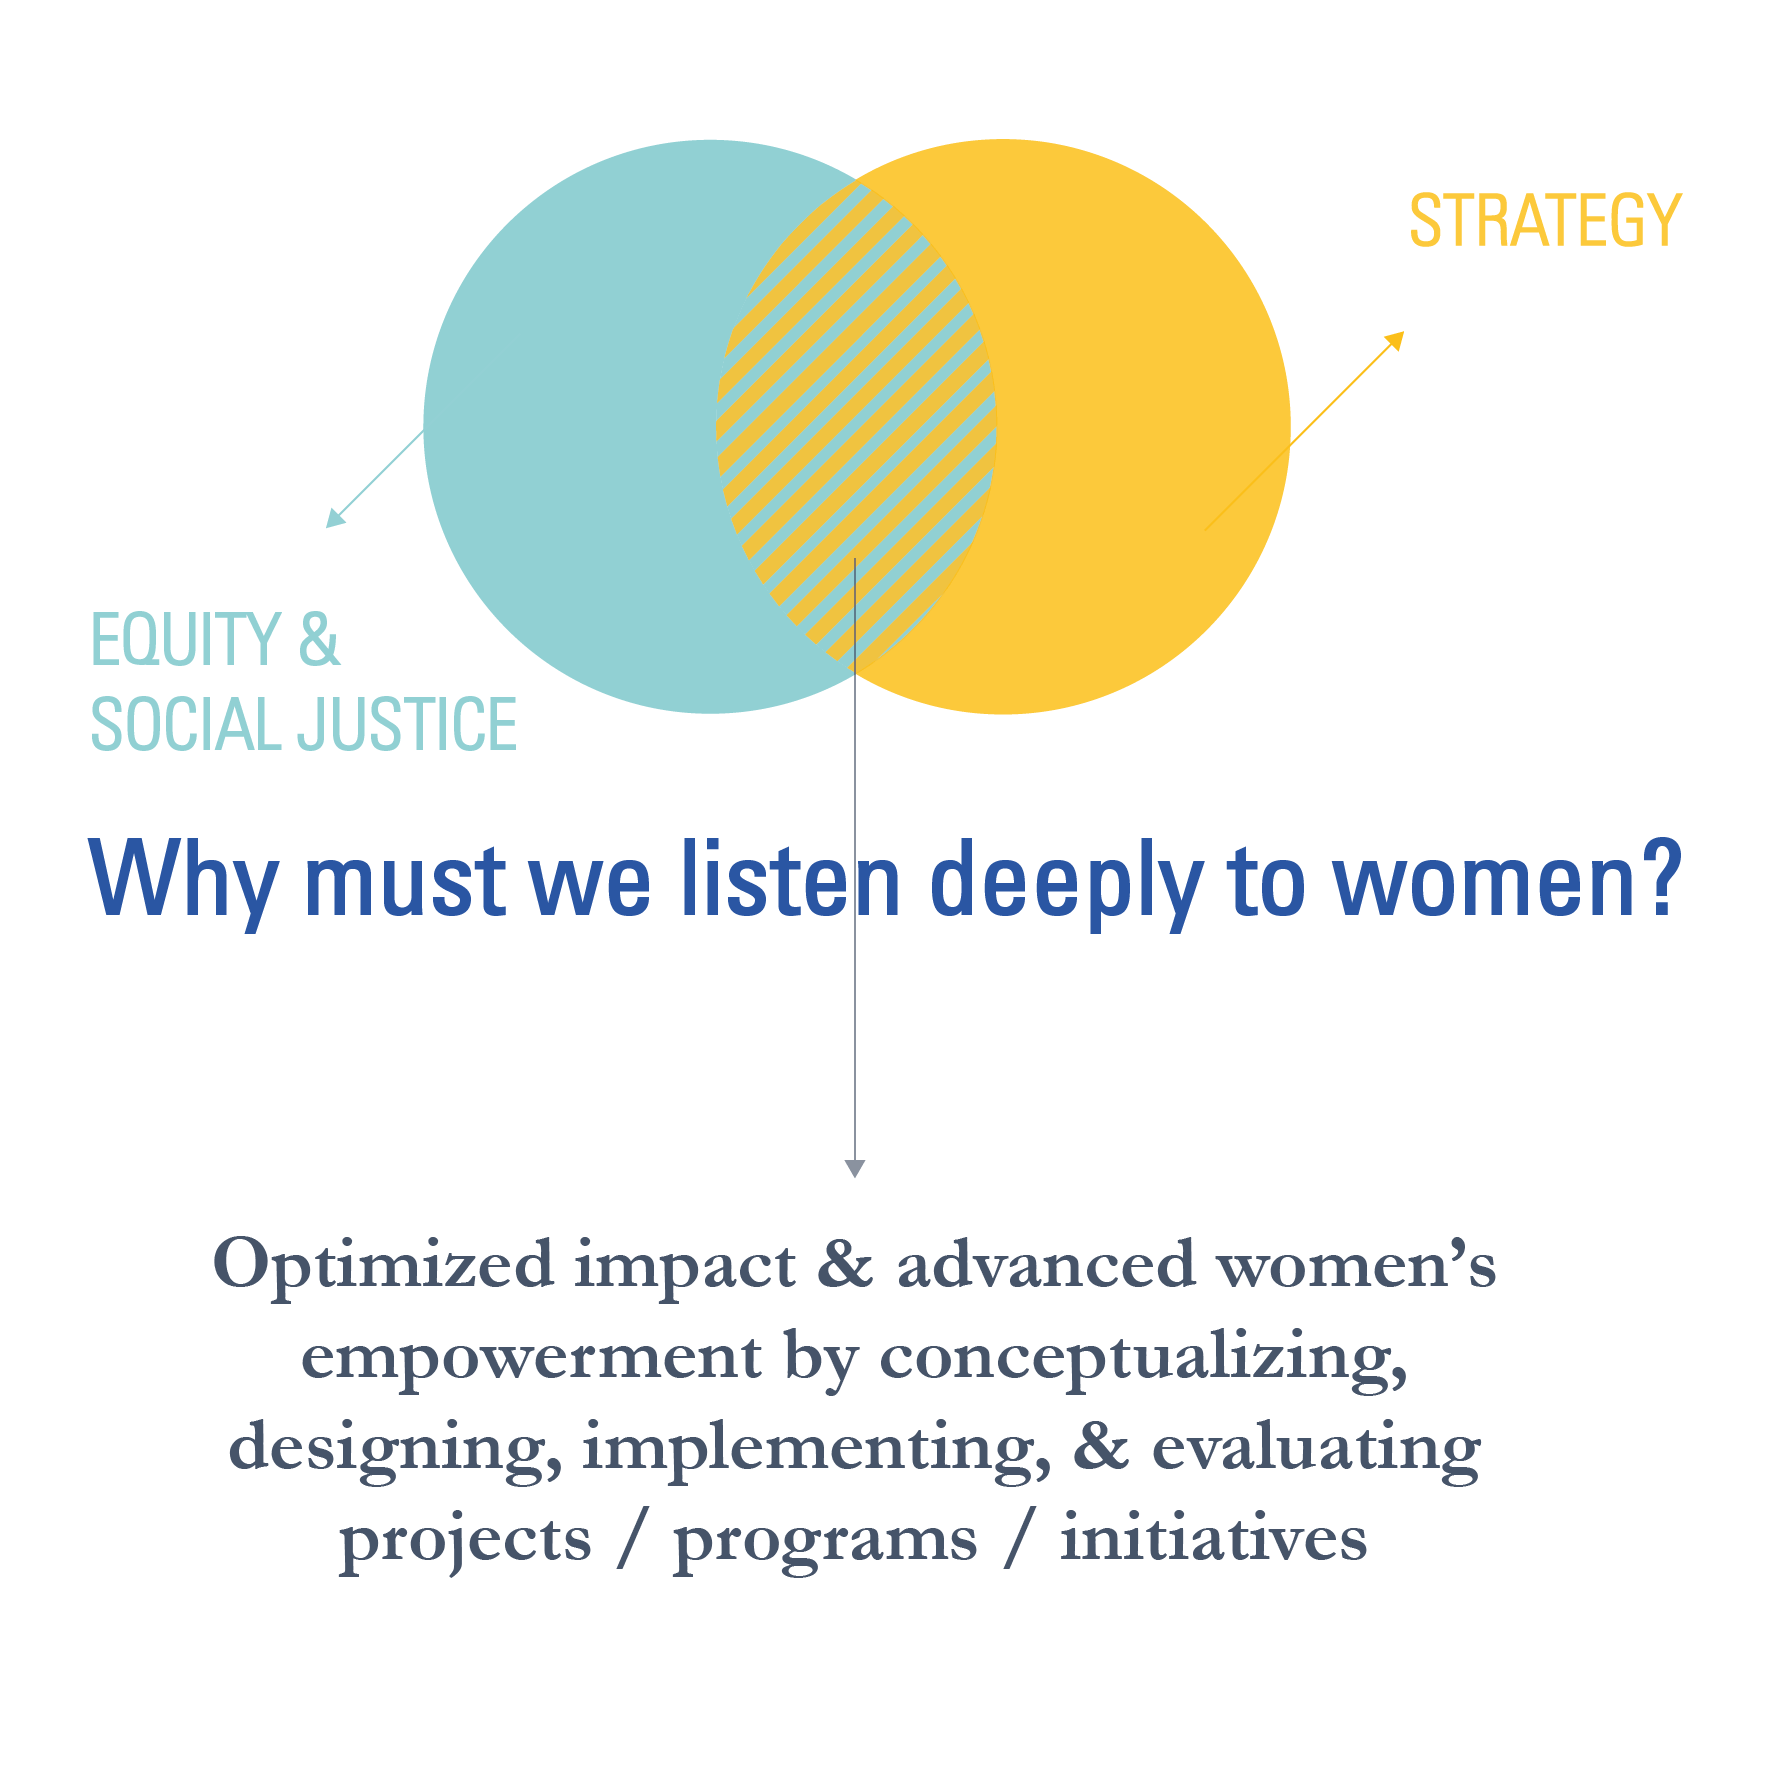 Infographic about listening to women and merging strategy with equity and social justice